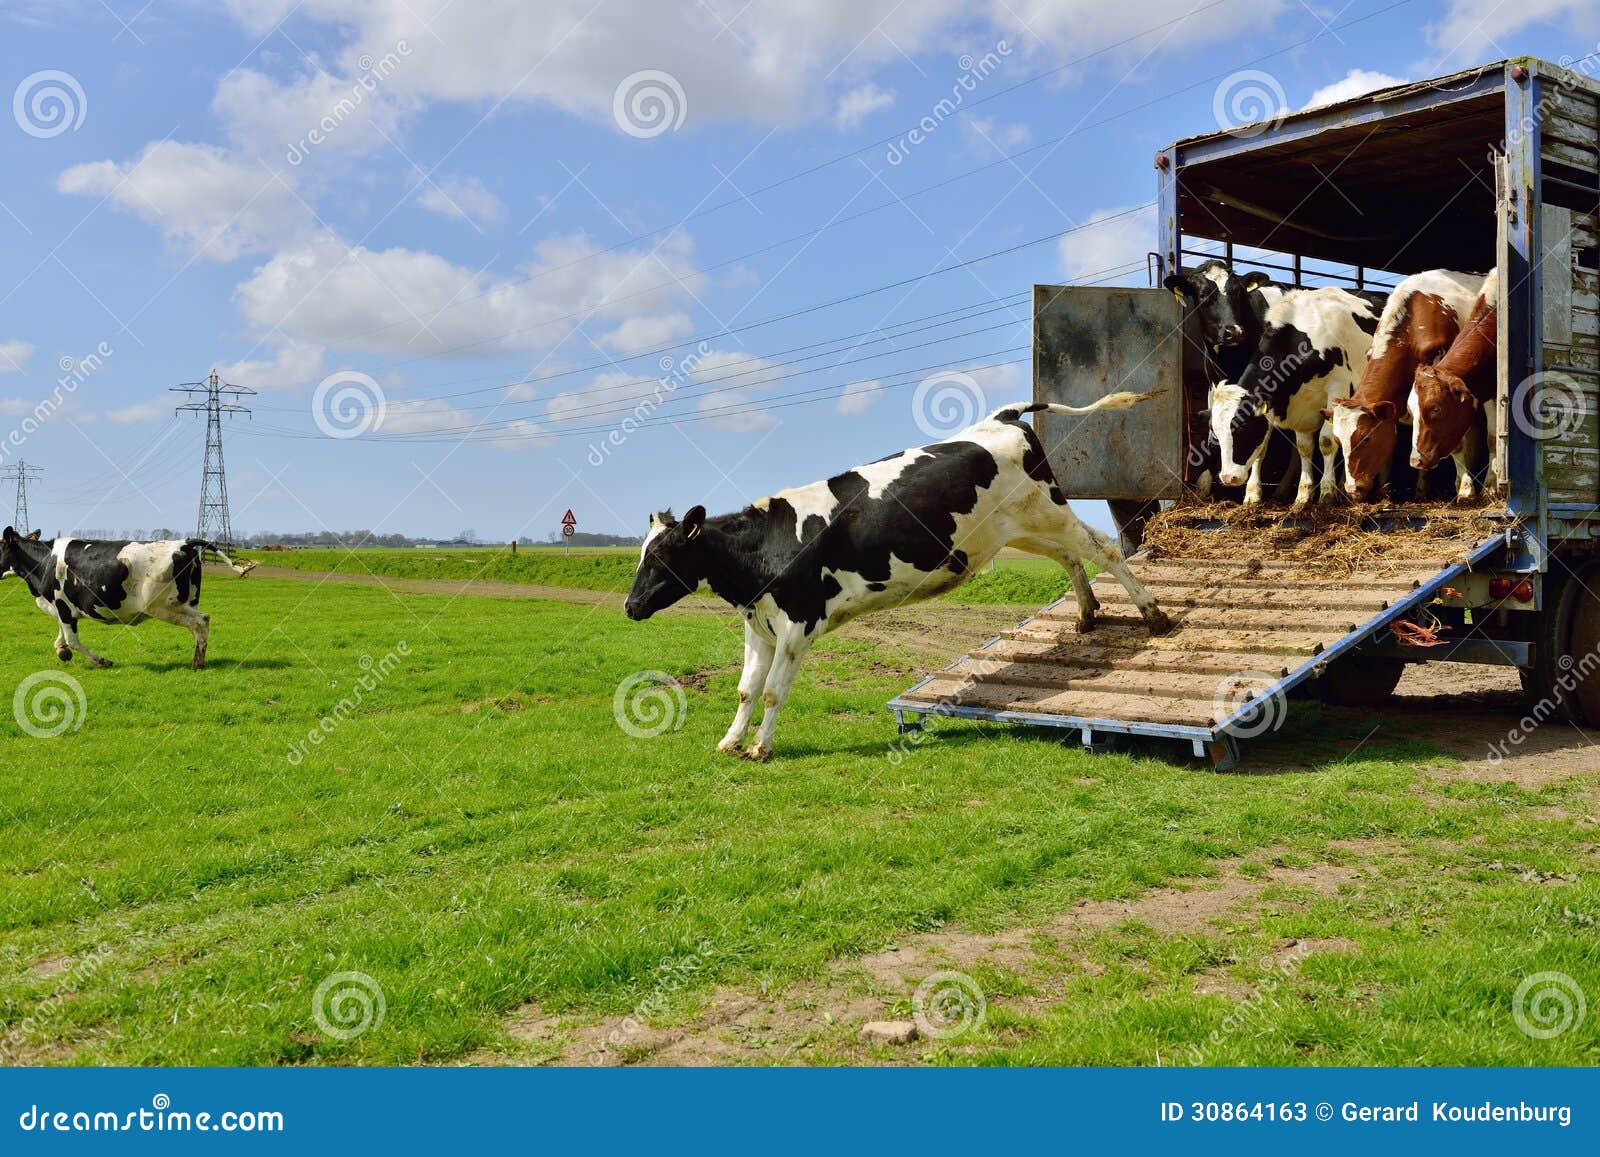 Cow Runs in Meadow after Livestock Transport Stock Image - Image of ...